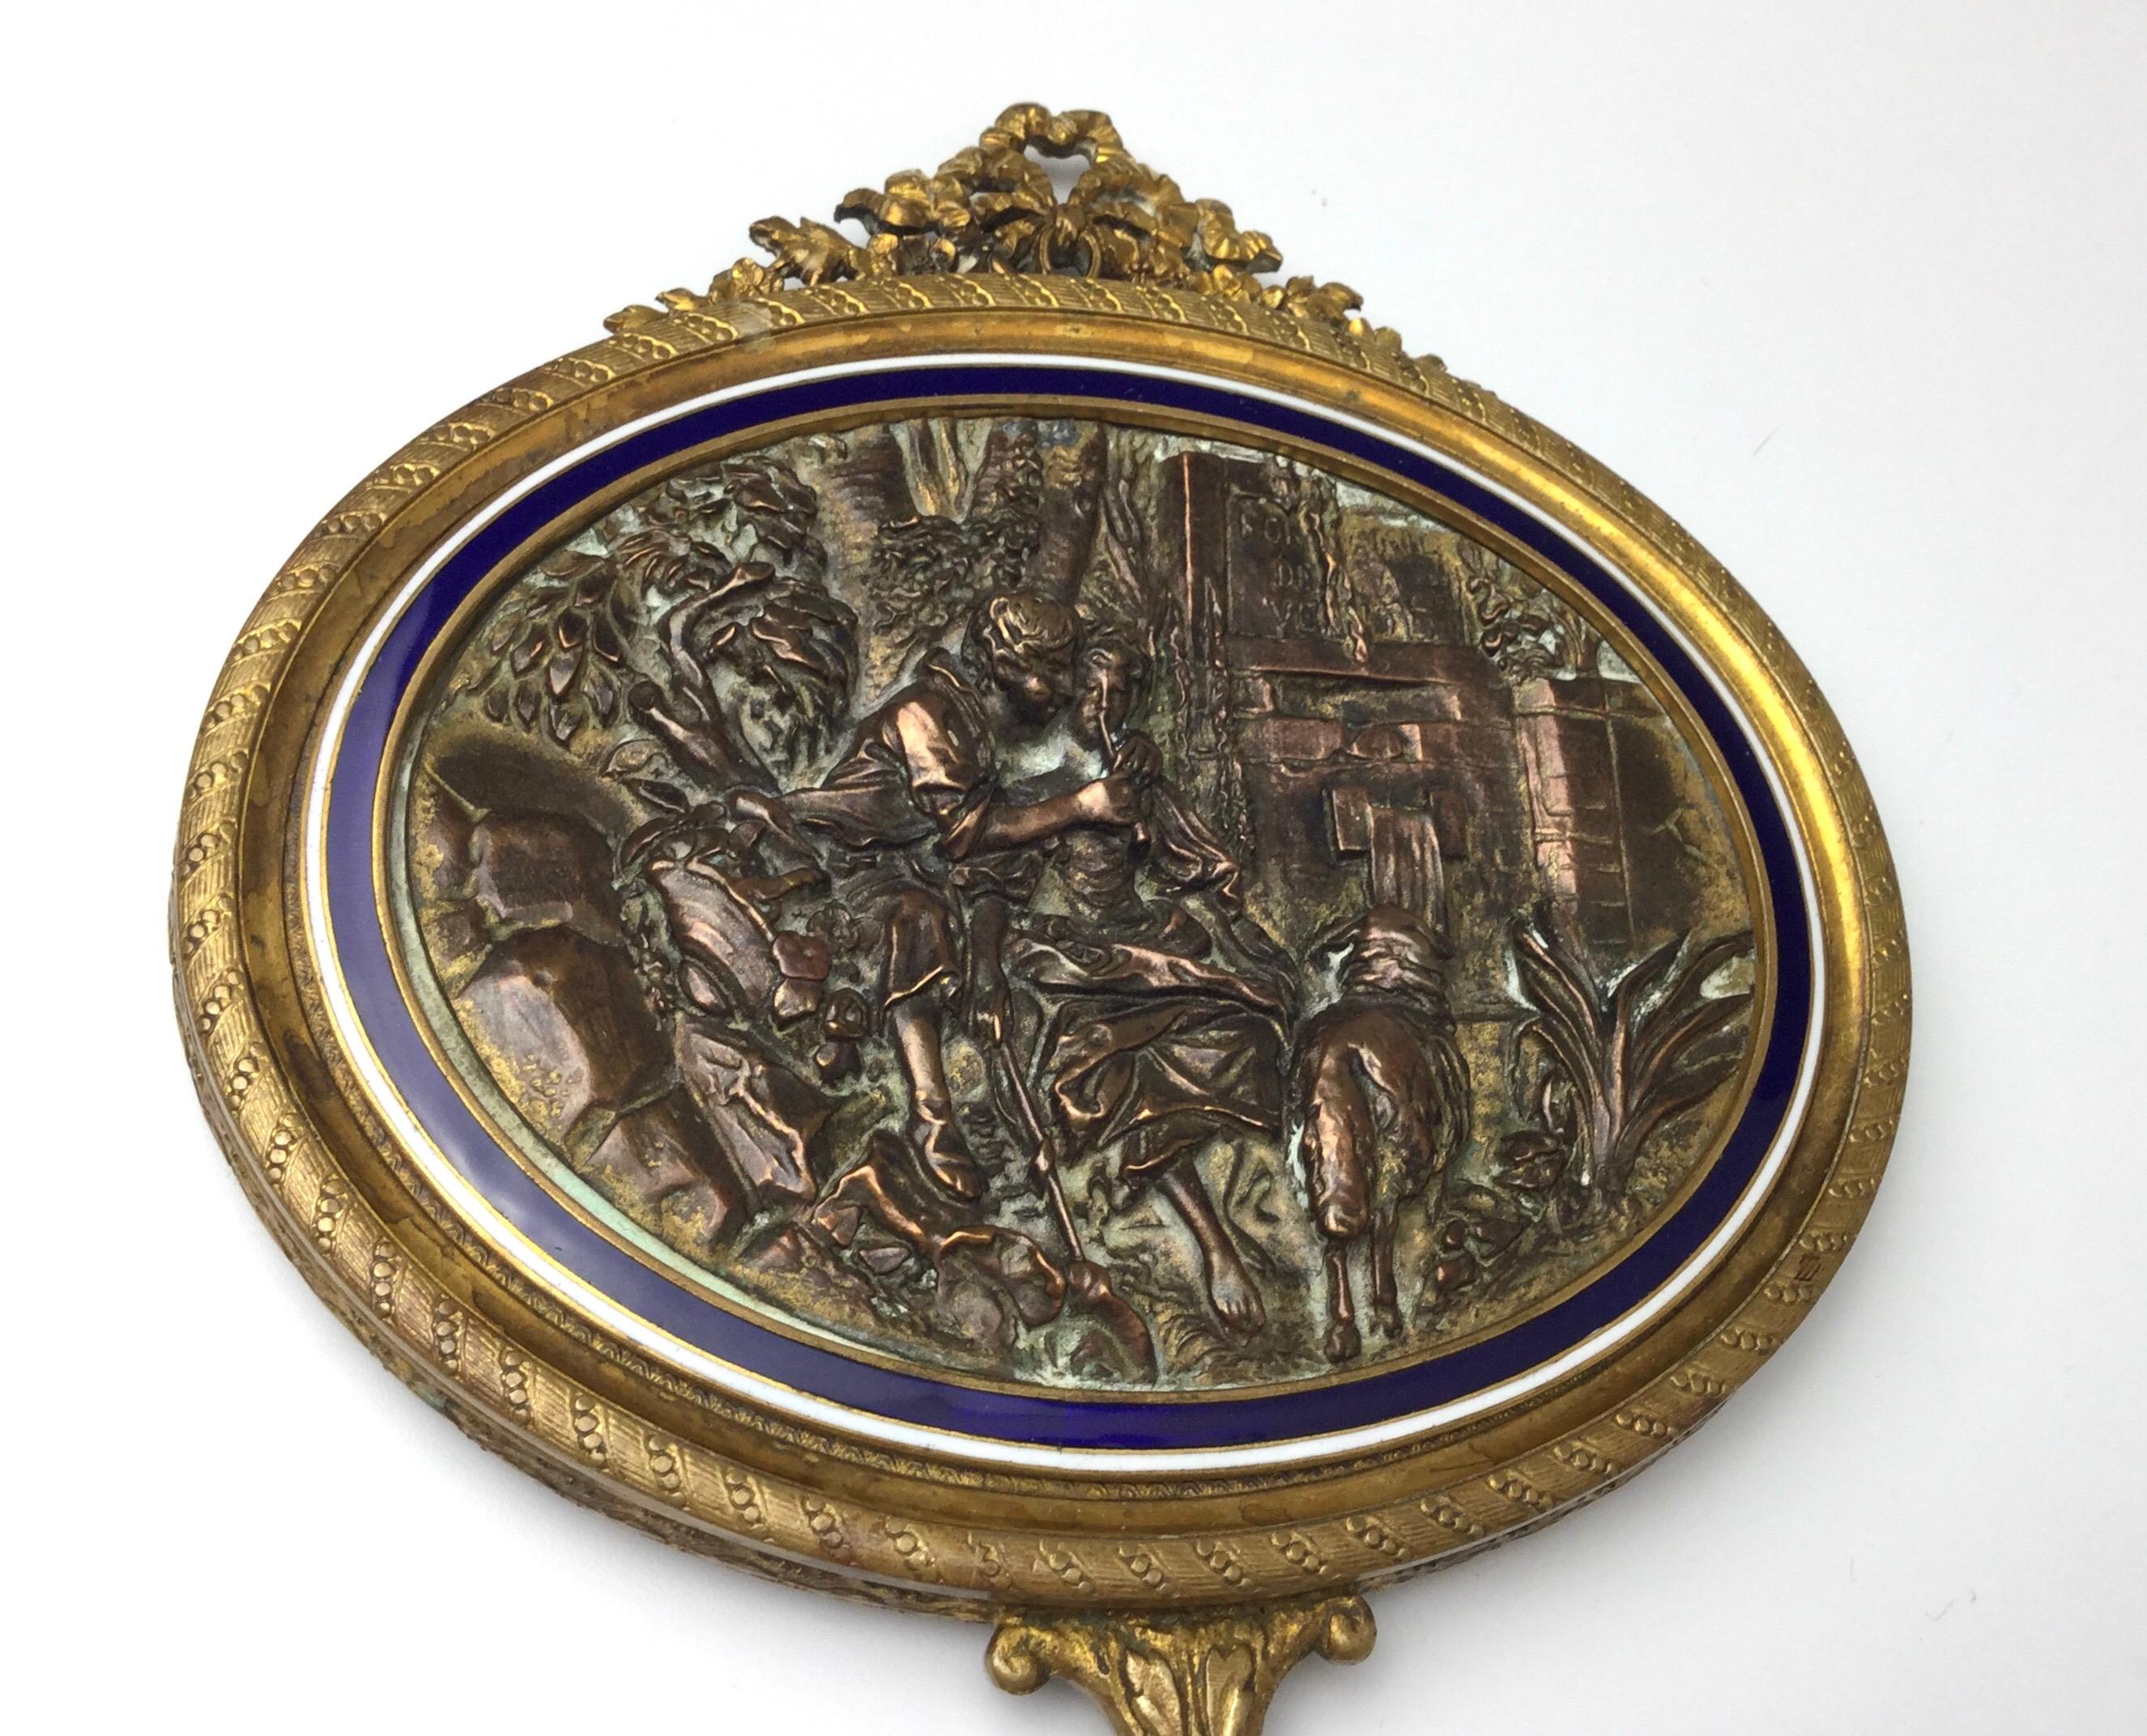 Wonderful gilt bronze with blue and white enamel hand mirror. Marked France on one side of the handle and New York on the other. Measures: 10” by 5 1/4” Age appropriate ware to frame. Beveled mirror has some discoloring around the edges.